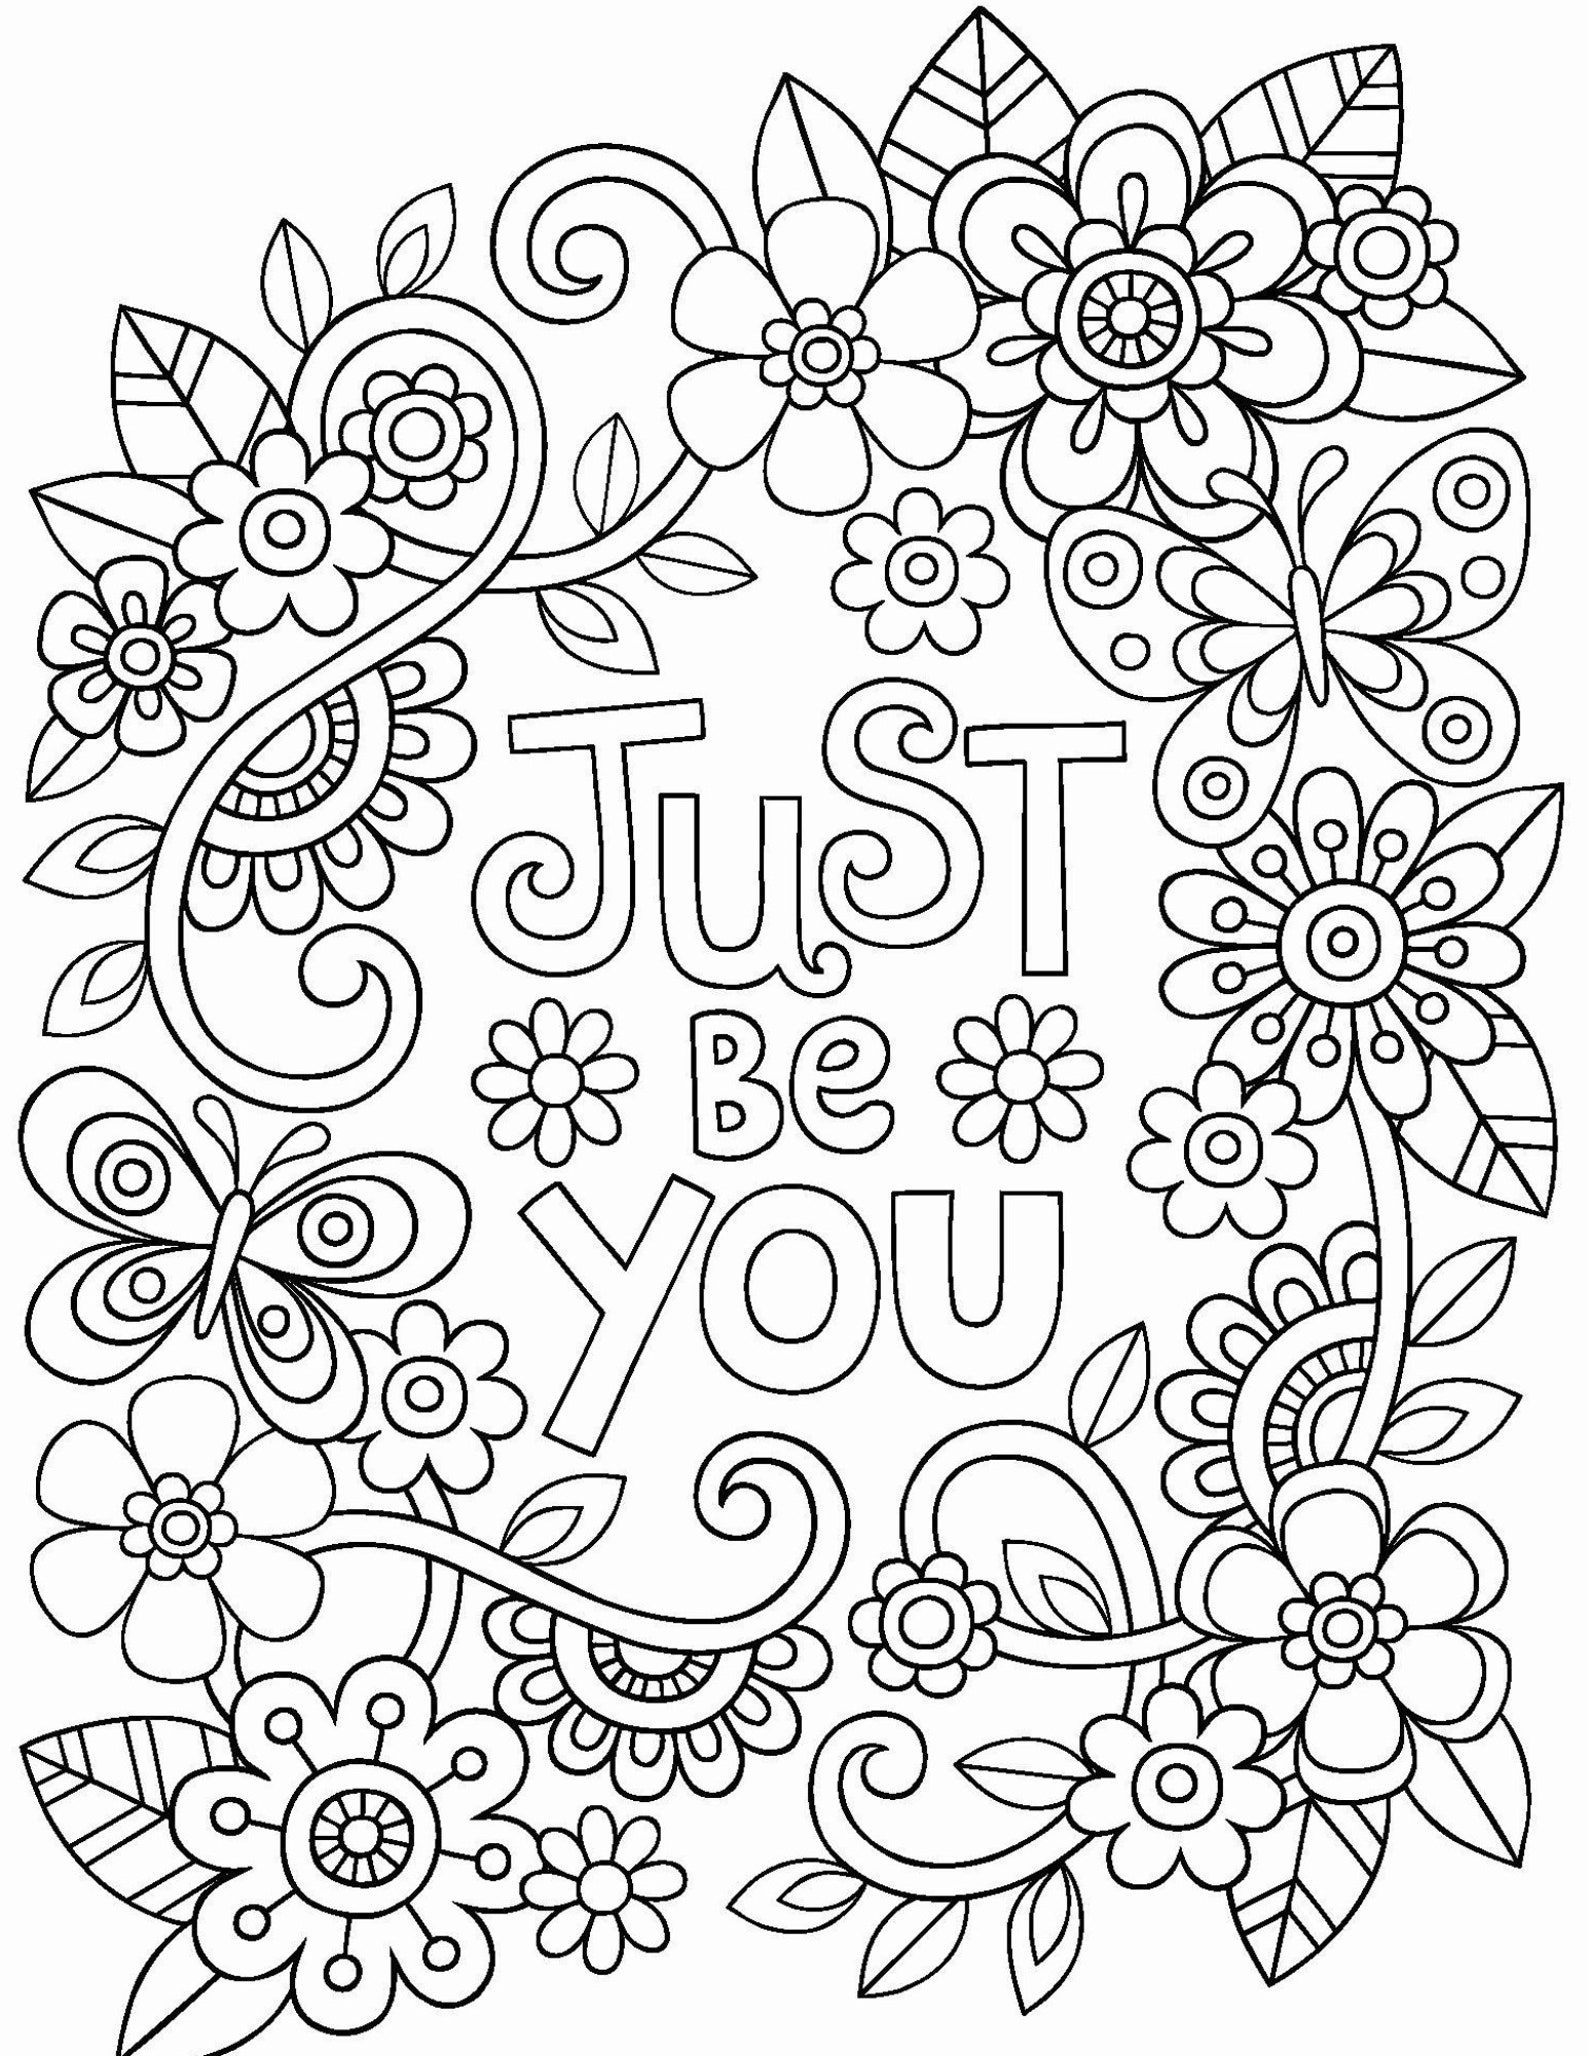 Adult Coloring Pages Believe Coloring Pages